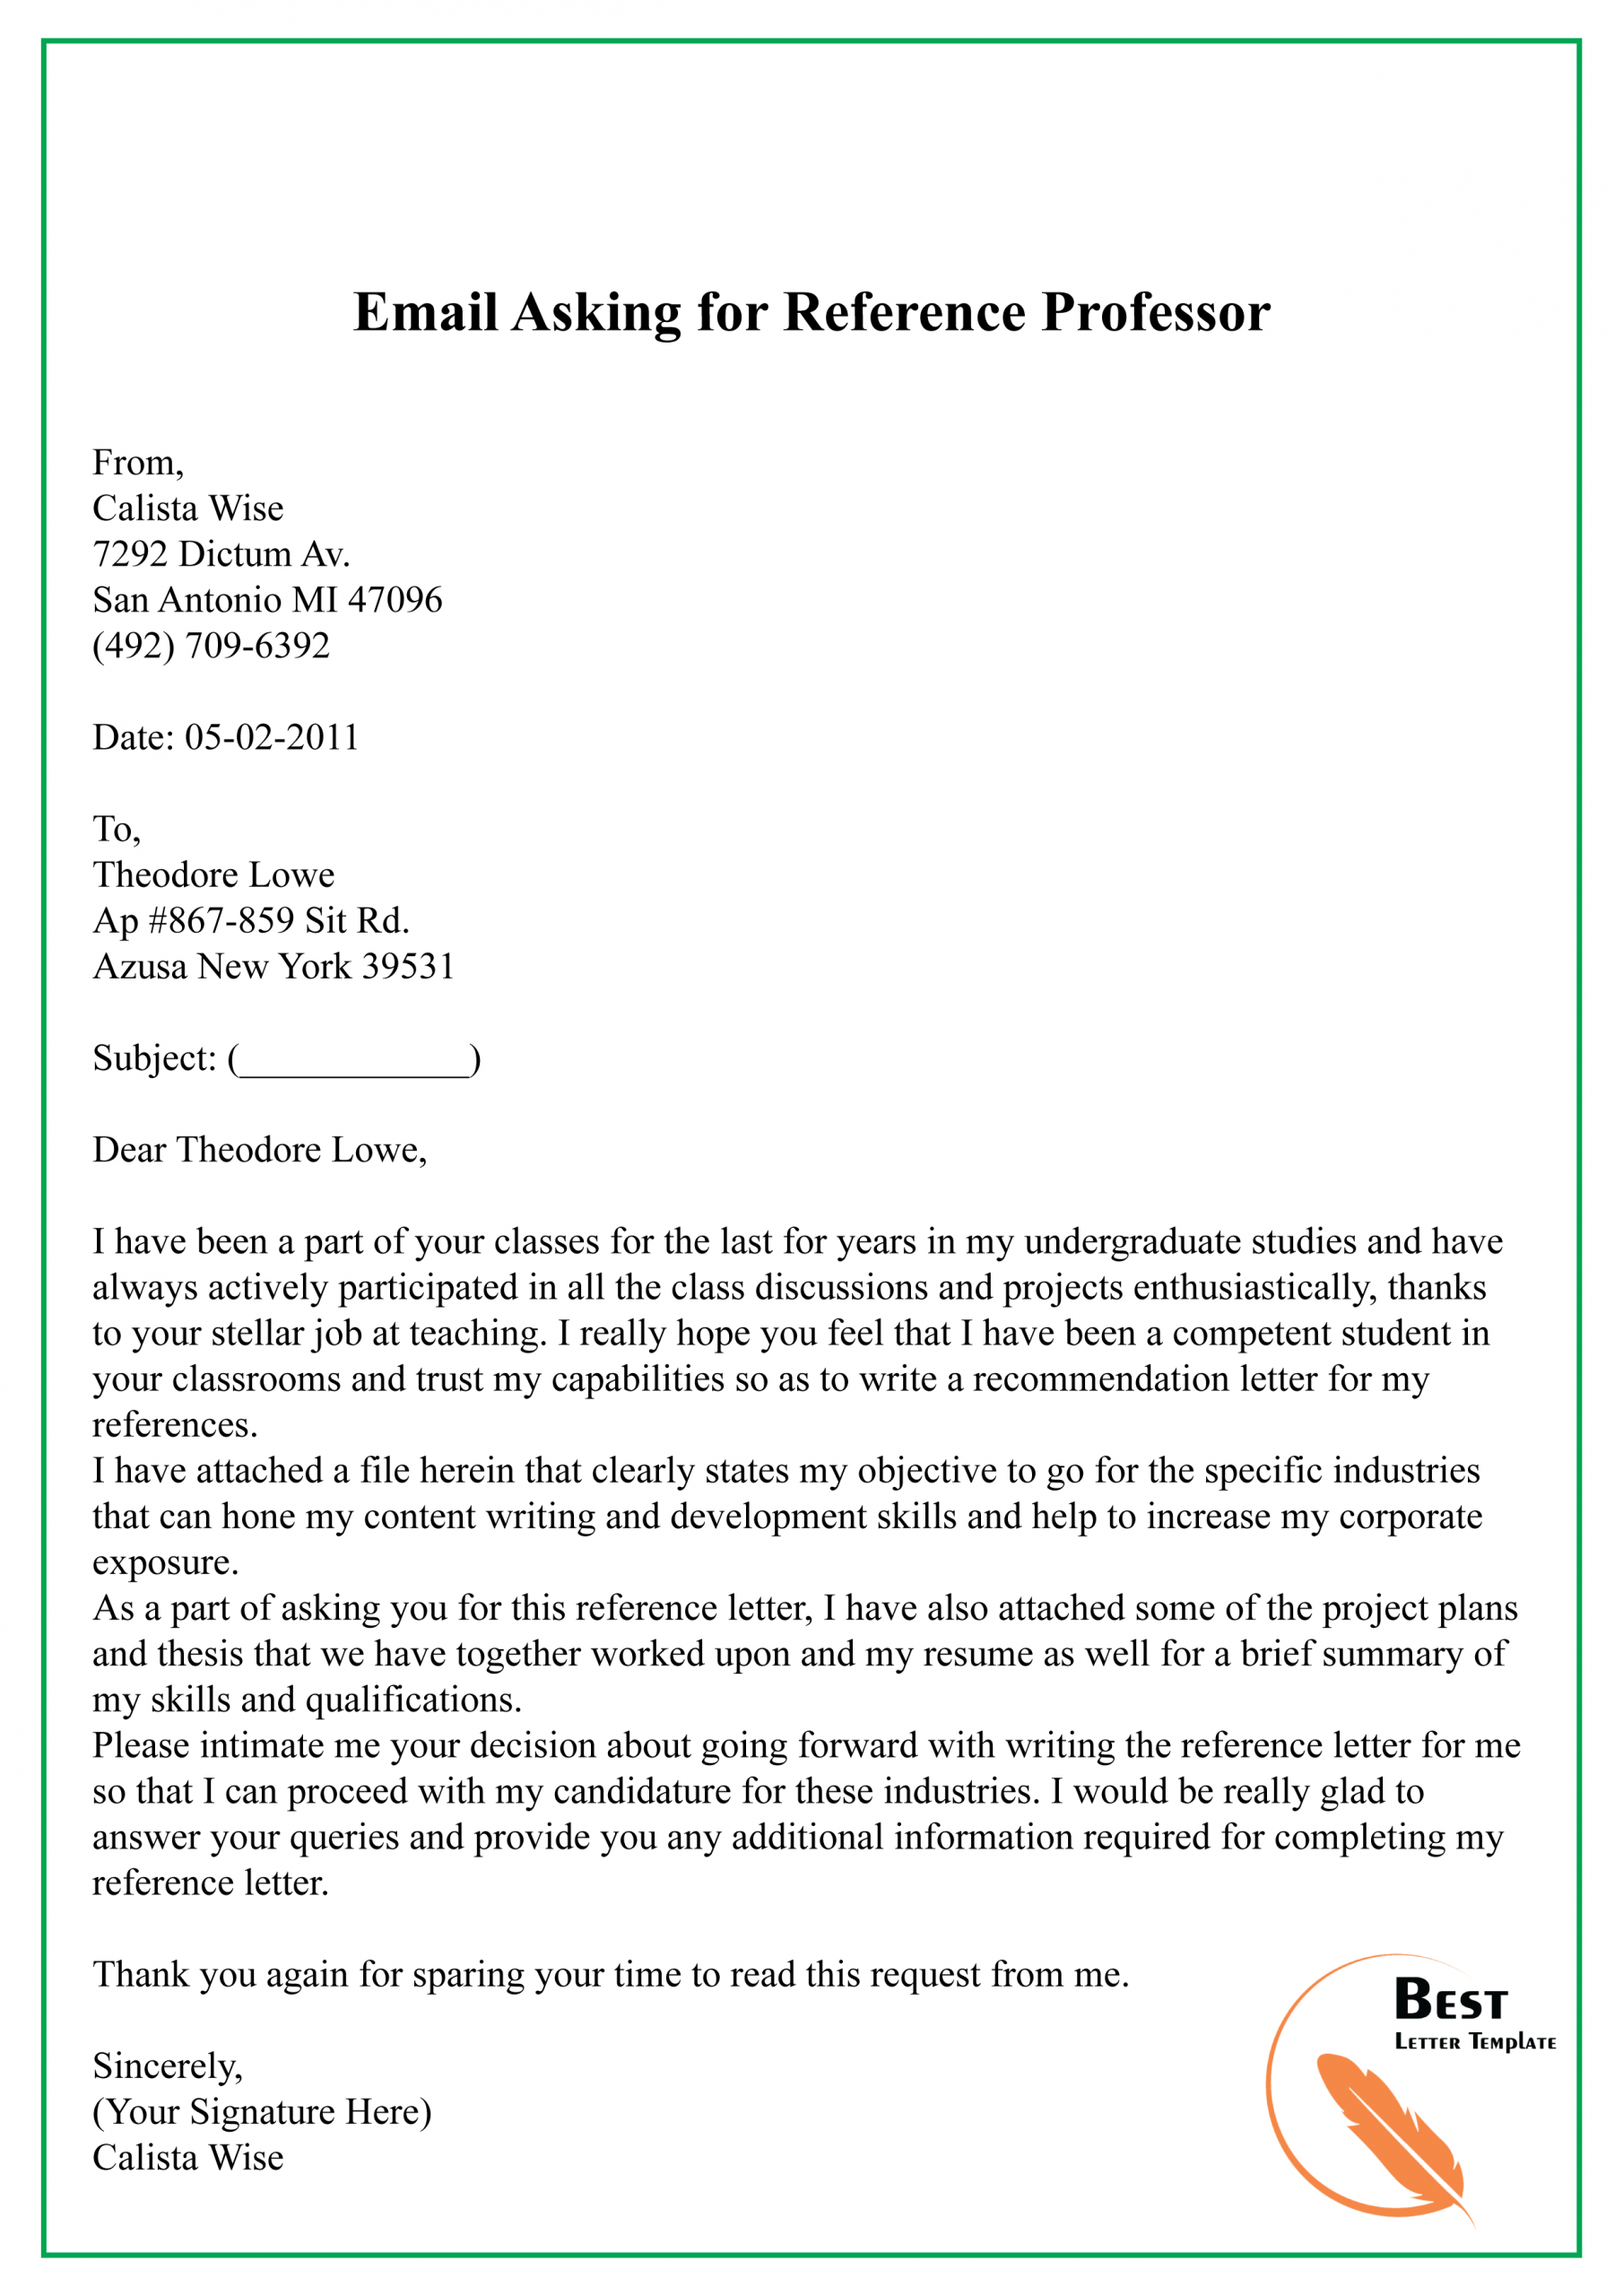 Email Asking For Reference Professor 01 Best Letter Template throughout dimensions 2480 X 3508